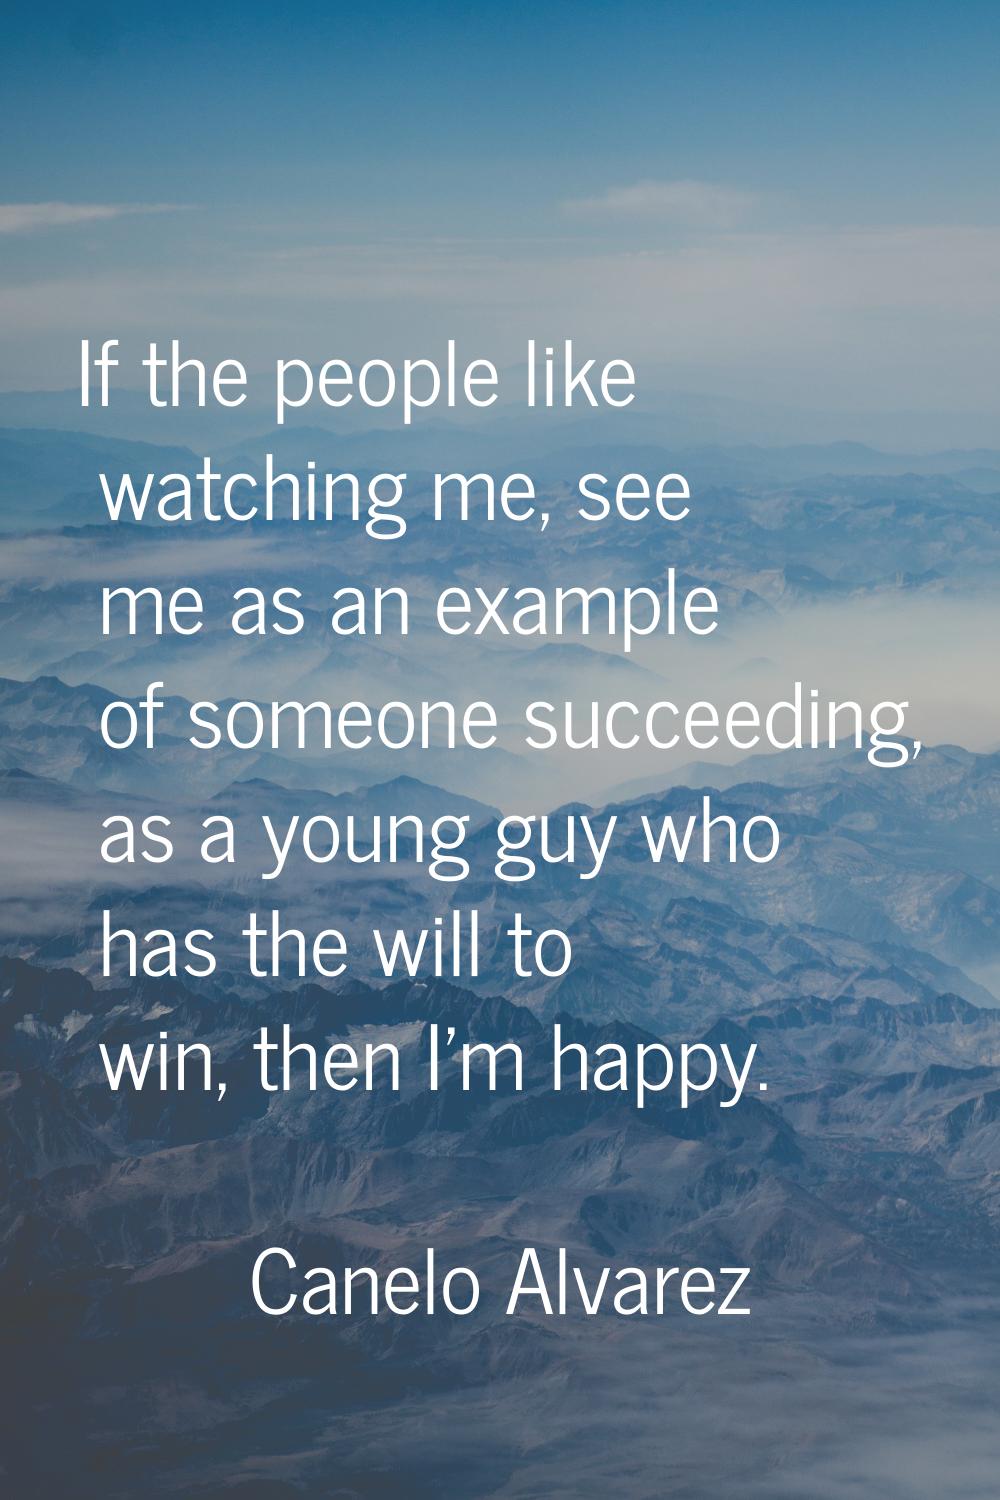 If the people like watching me, see me as an example of someone succeeding, as a young guy who has 